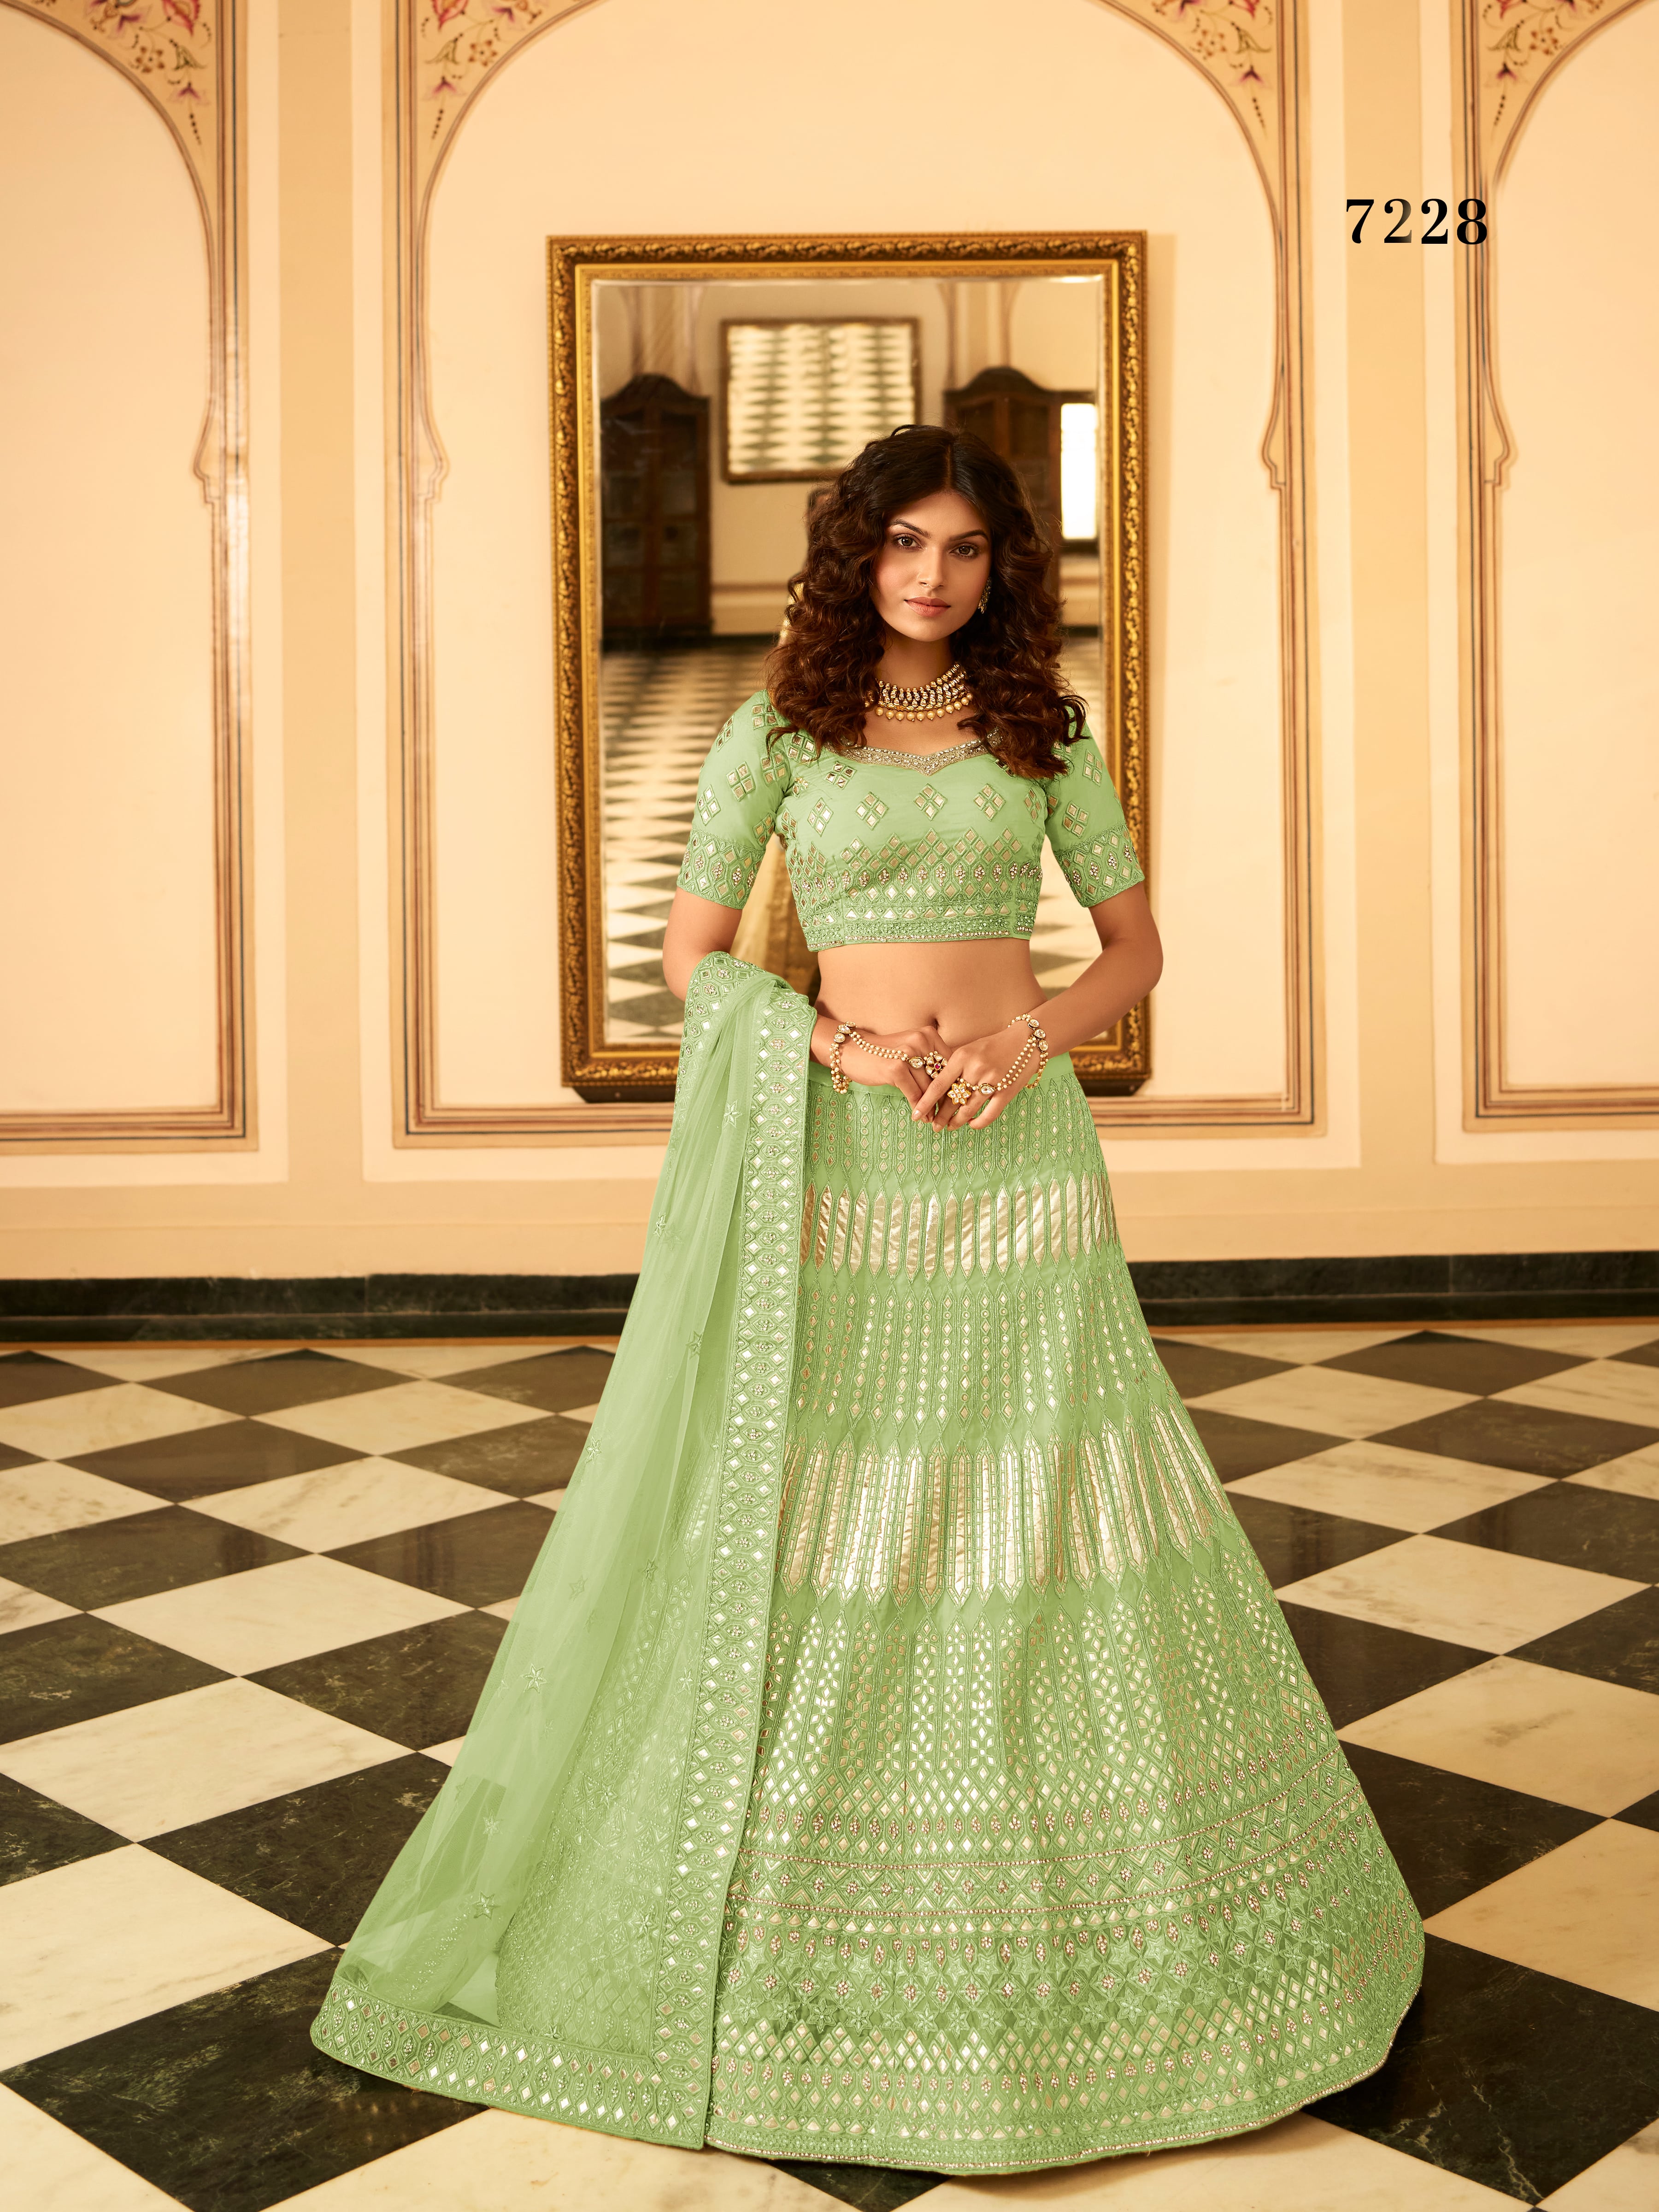 Mustard double-color unstitched net bridal lehenga features intricate  designs in silver thread embroidered & mirror work